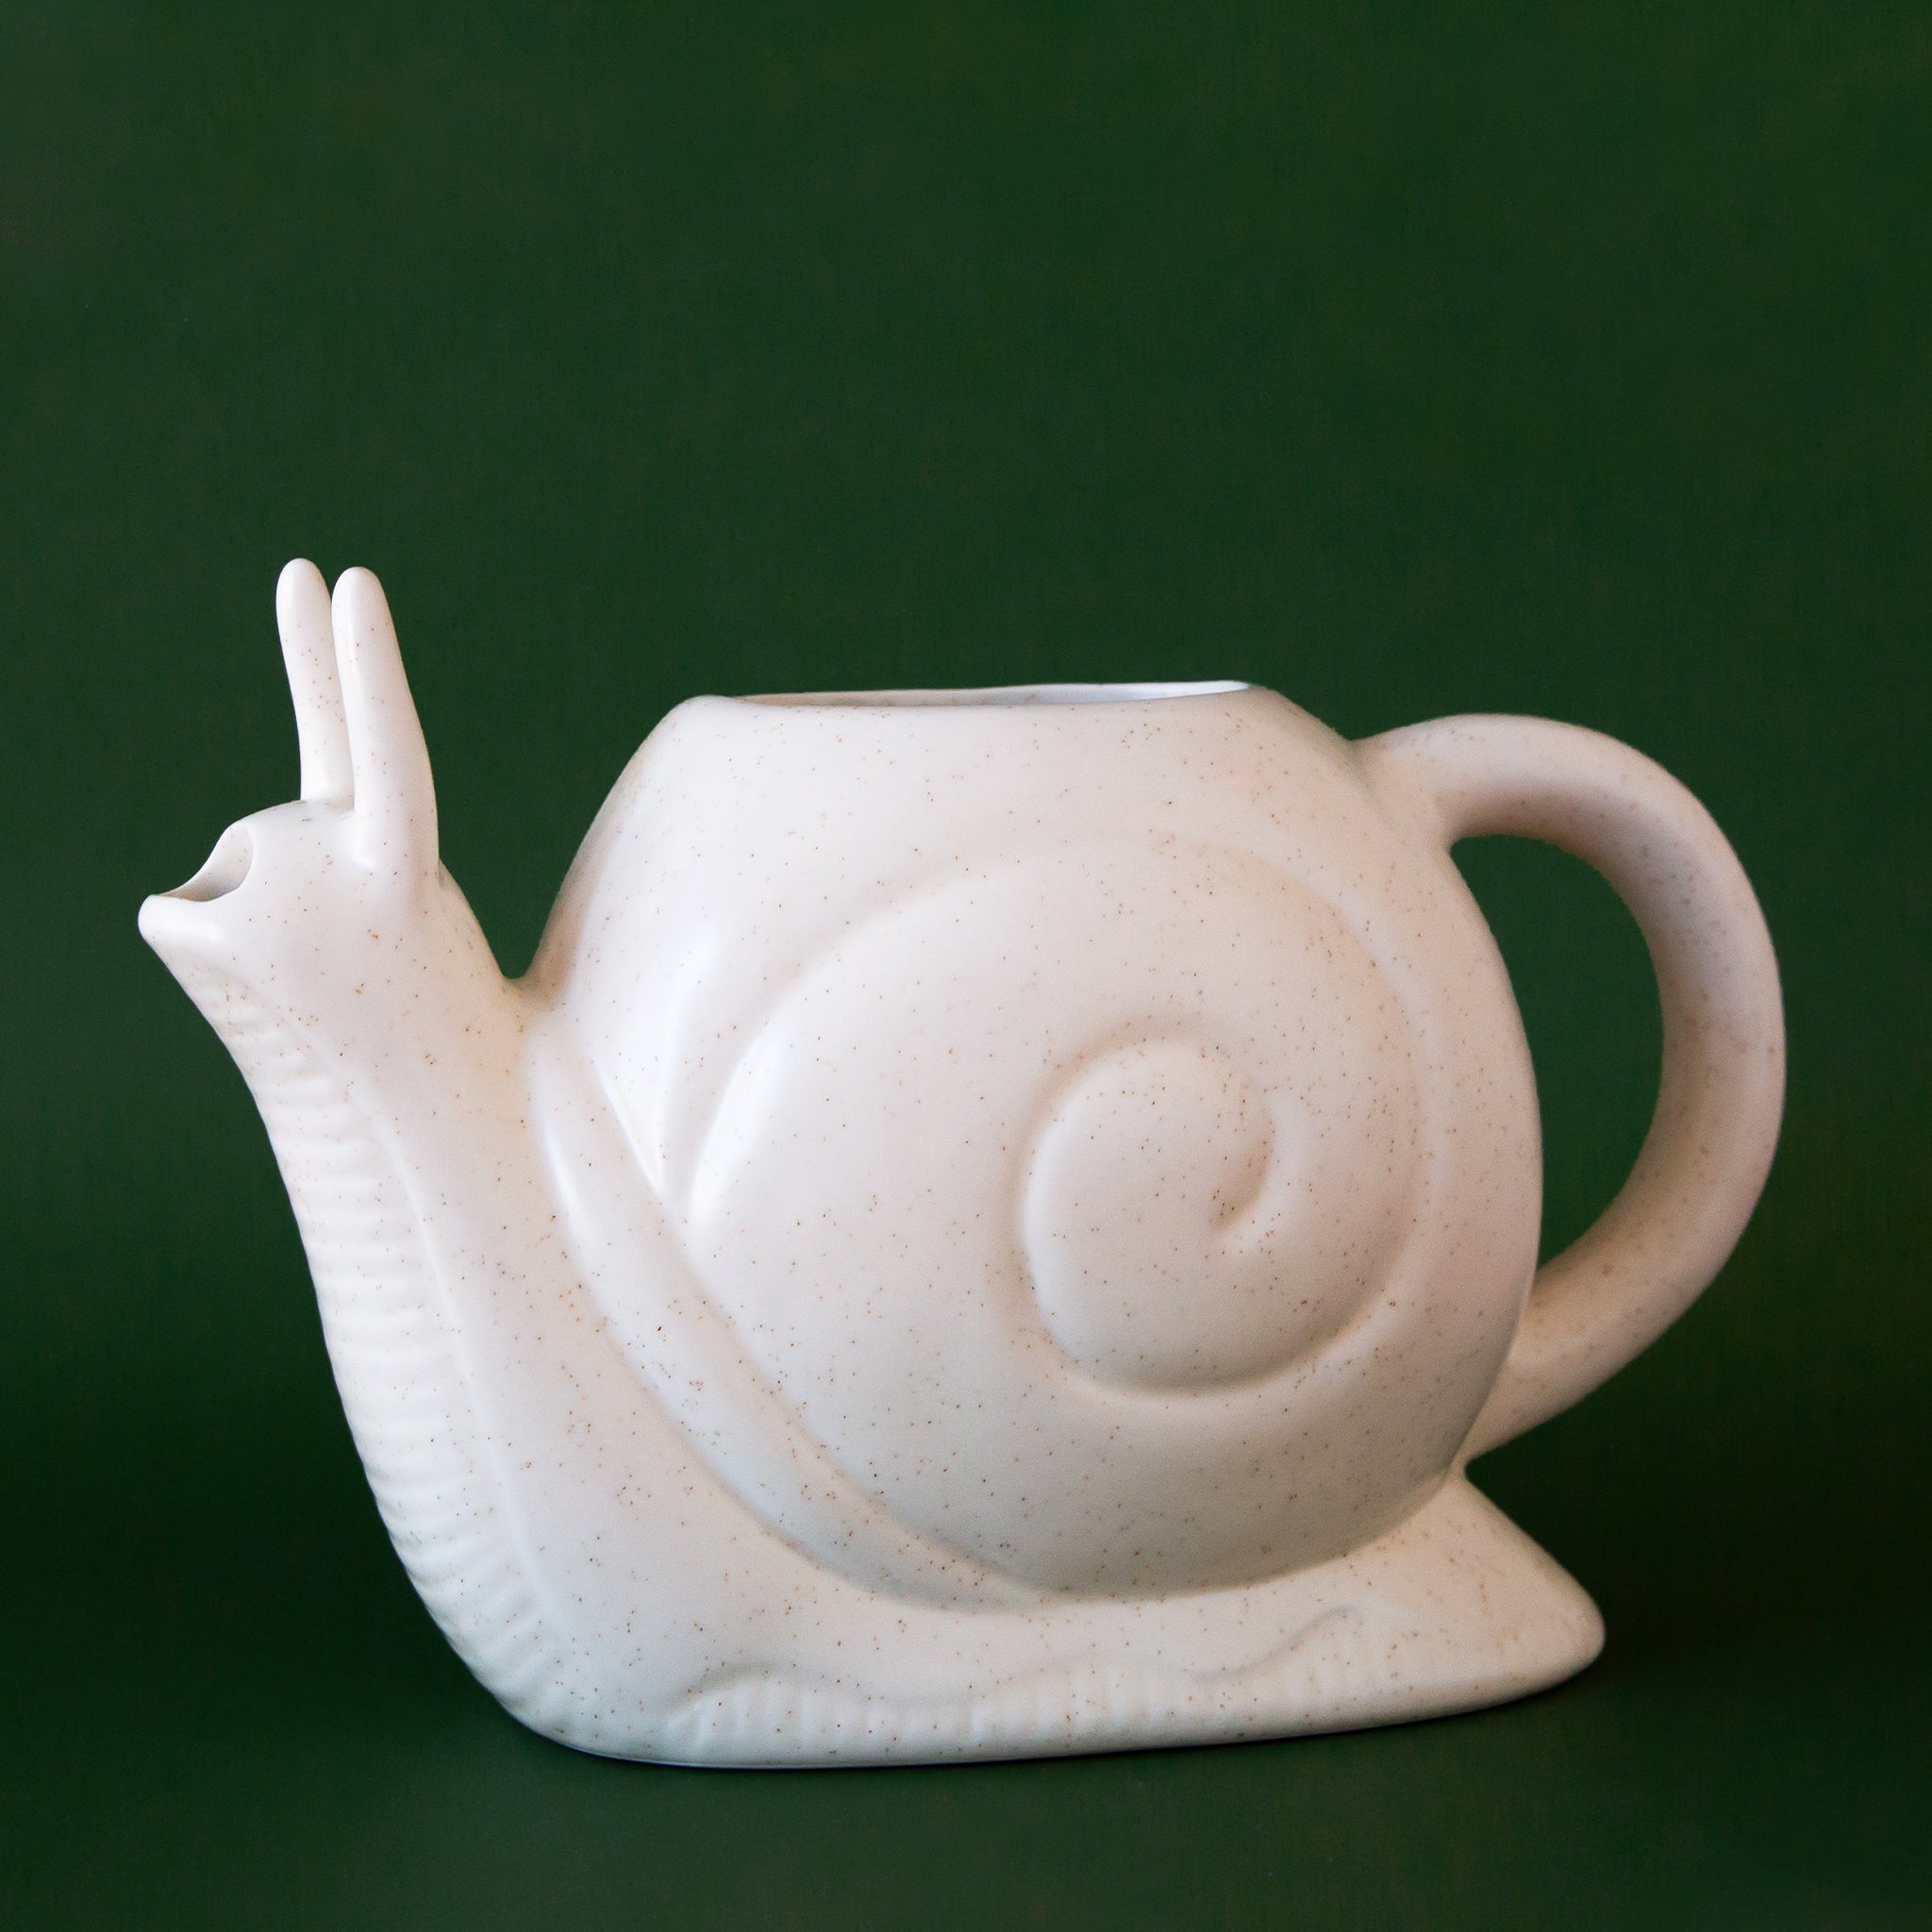 A white, ceramic watering can in the shape of a friendly snail. The opening for refilling with water is on the top of its swirly shell and the water spout comes out of the mouth area. This playful garden tool also features a comfortable handle for easy watering.